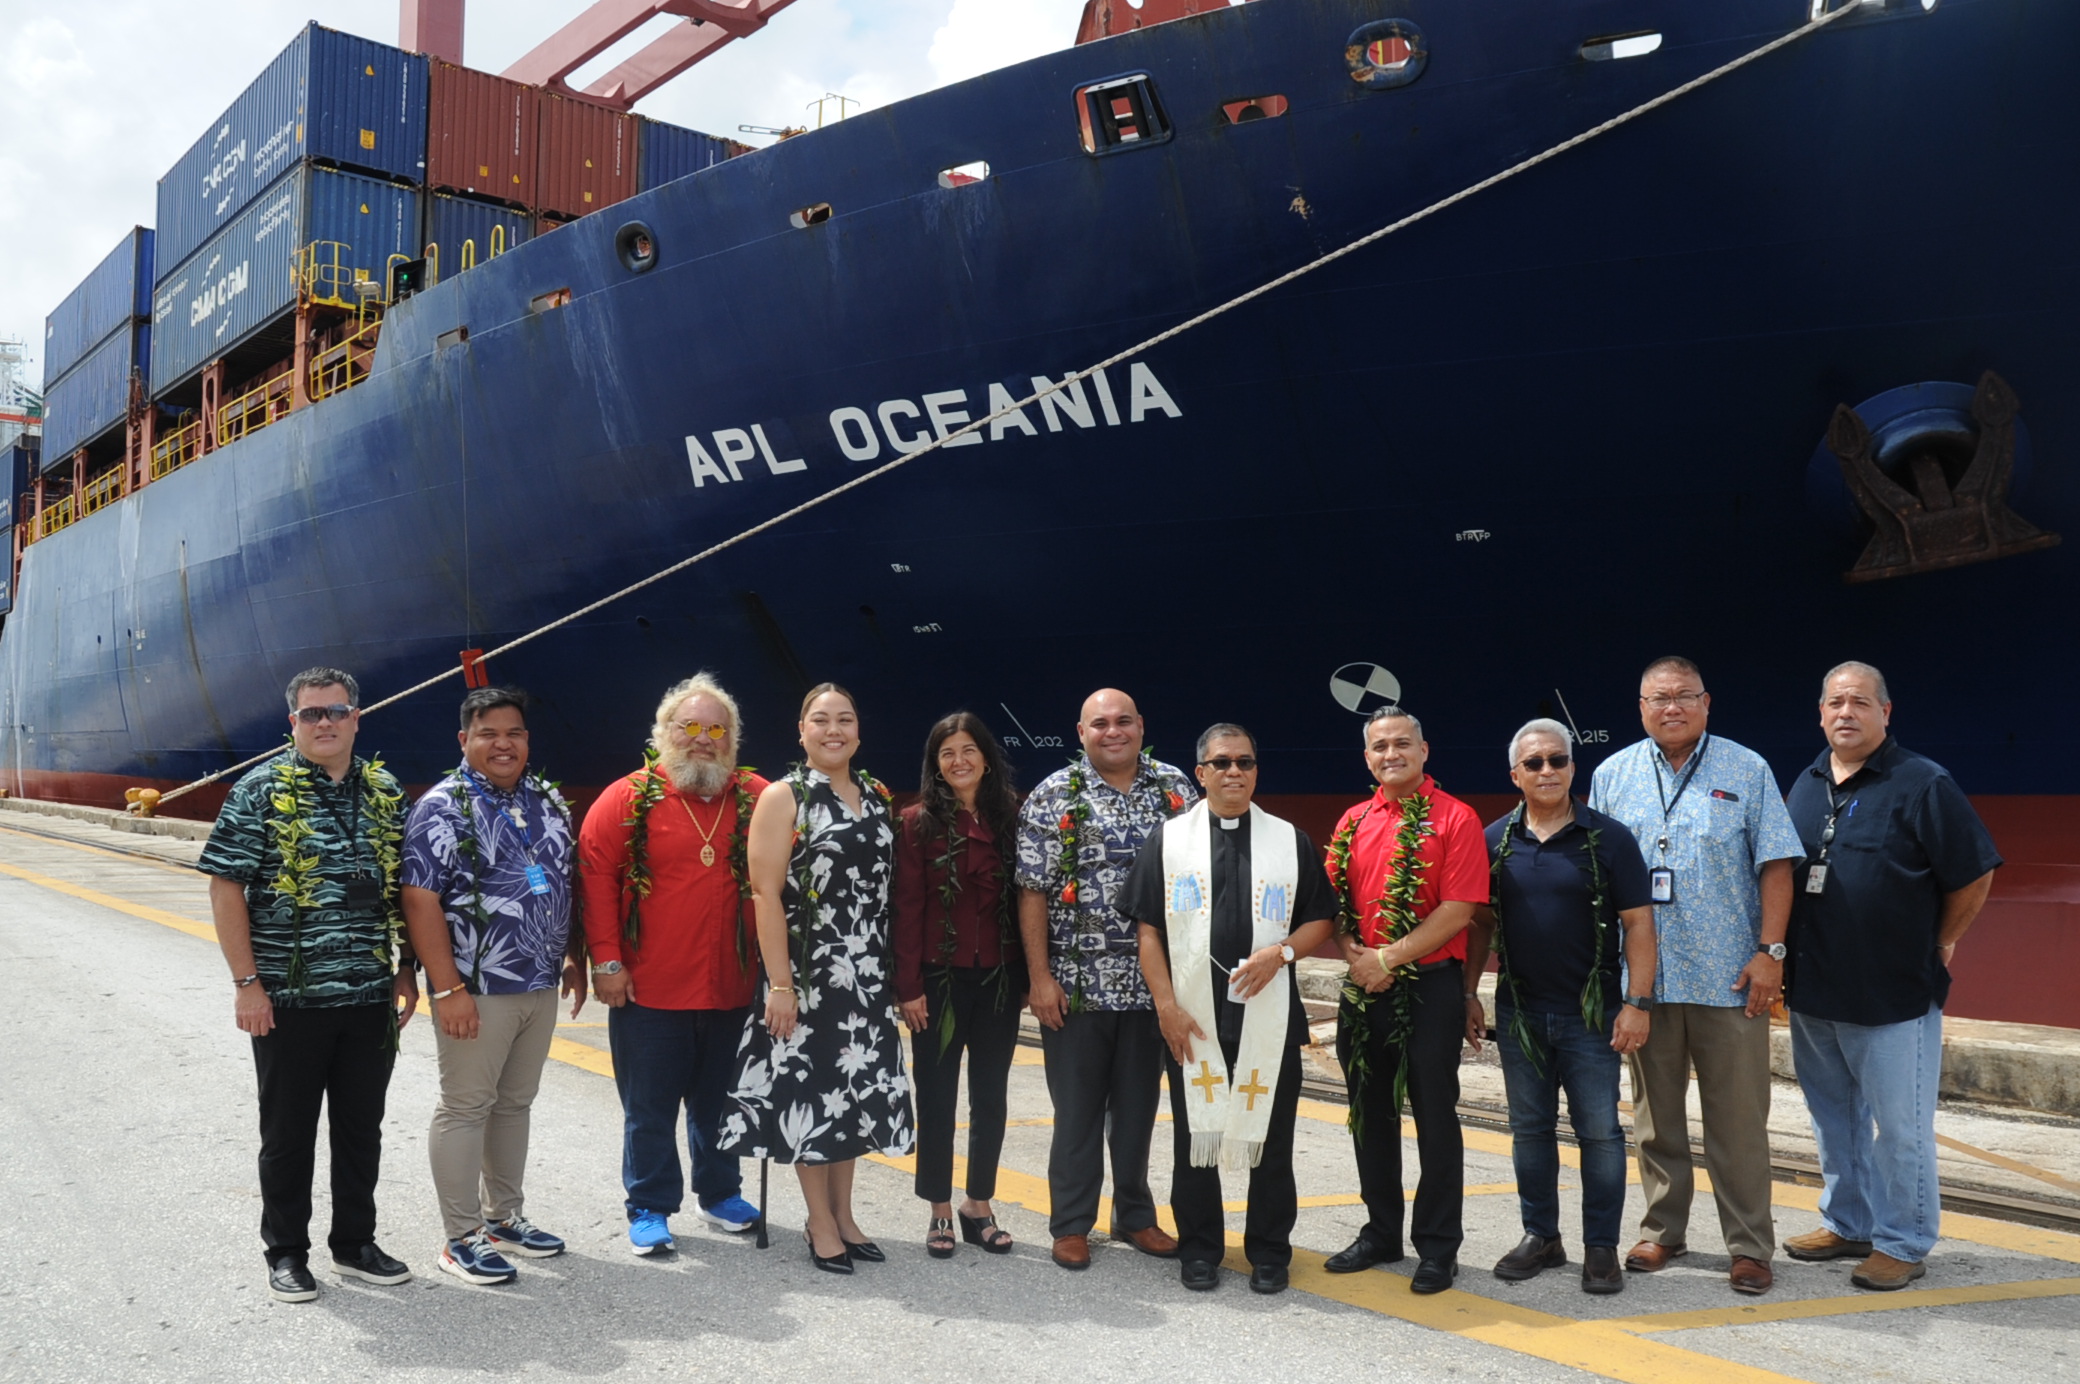 At the event were (from left) Rory Respicio, general manager of the port; Sen. Ray Quinata, Sen. Dwayne San Nicolas, Sen. Amanda Shelton, Sen. Therese Terlaje, speaker of the 37th Guam Legislature, Lt. Governor Joshua F. Tenorio;  Father Danilo B. Trajano of the Assumption of Our Lady church in Piti; Charlie Hermosa, general manager of APL; Sen. Jesse Lujan, Pacifico Maartir, deputy general manager for administration and finance, and Dominic Muna; deputy general manager for operations, both with the port. Photo by Justin Green